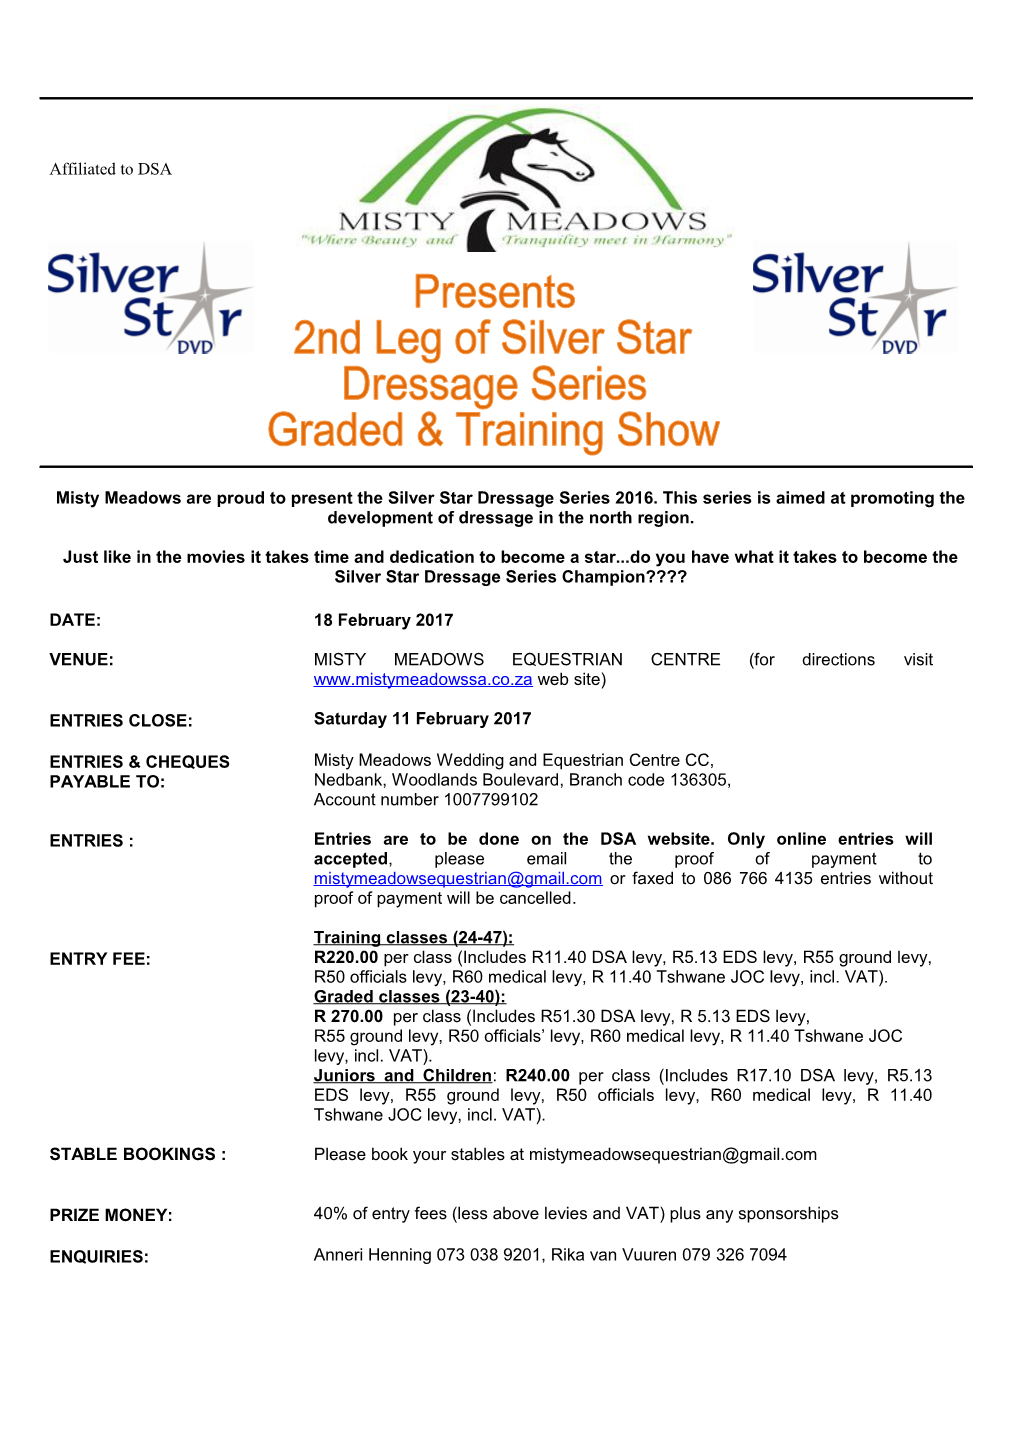 Misty Meadows Are Proud to Present the Silver Star Dressage Series 2016. This Series Is